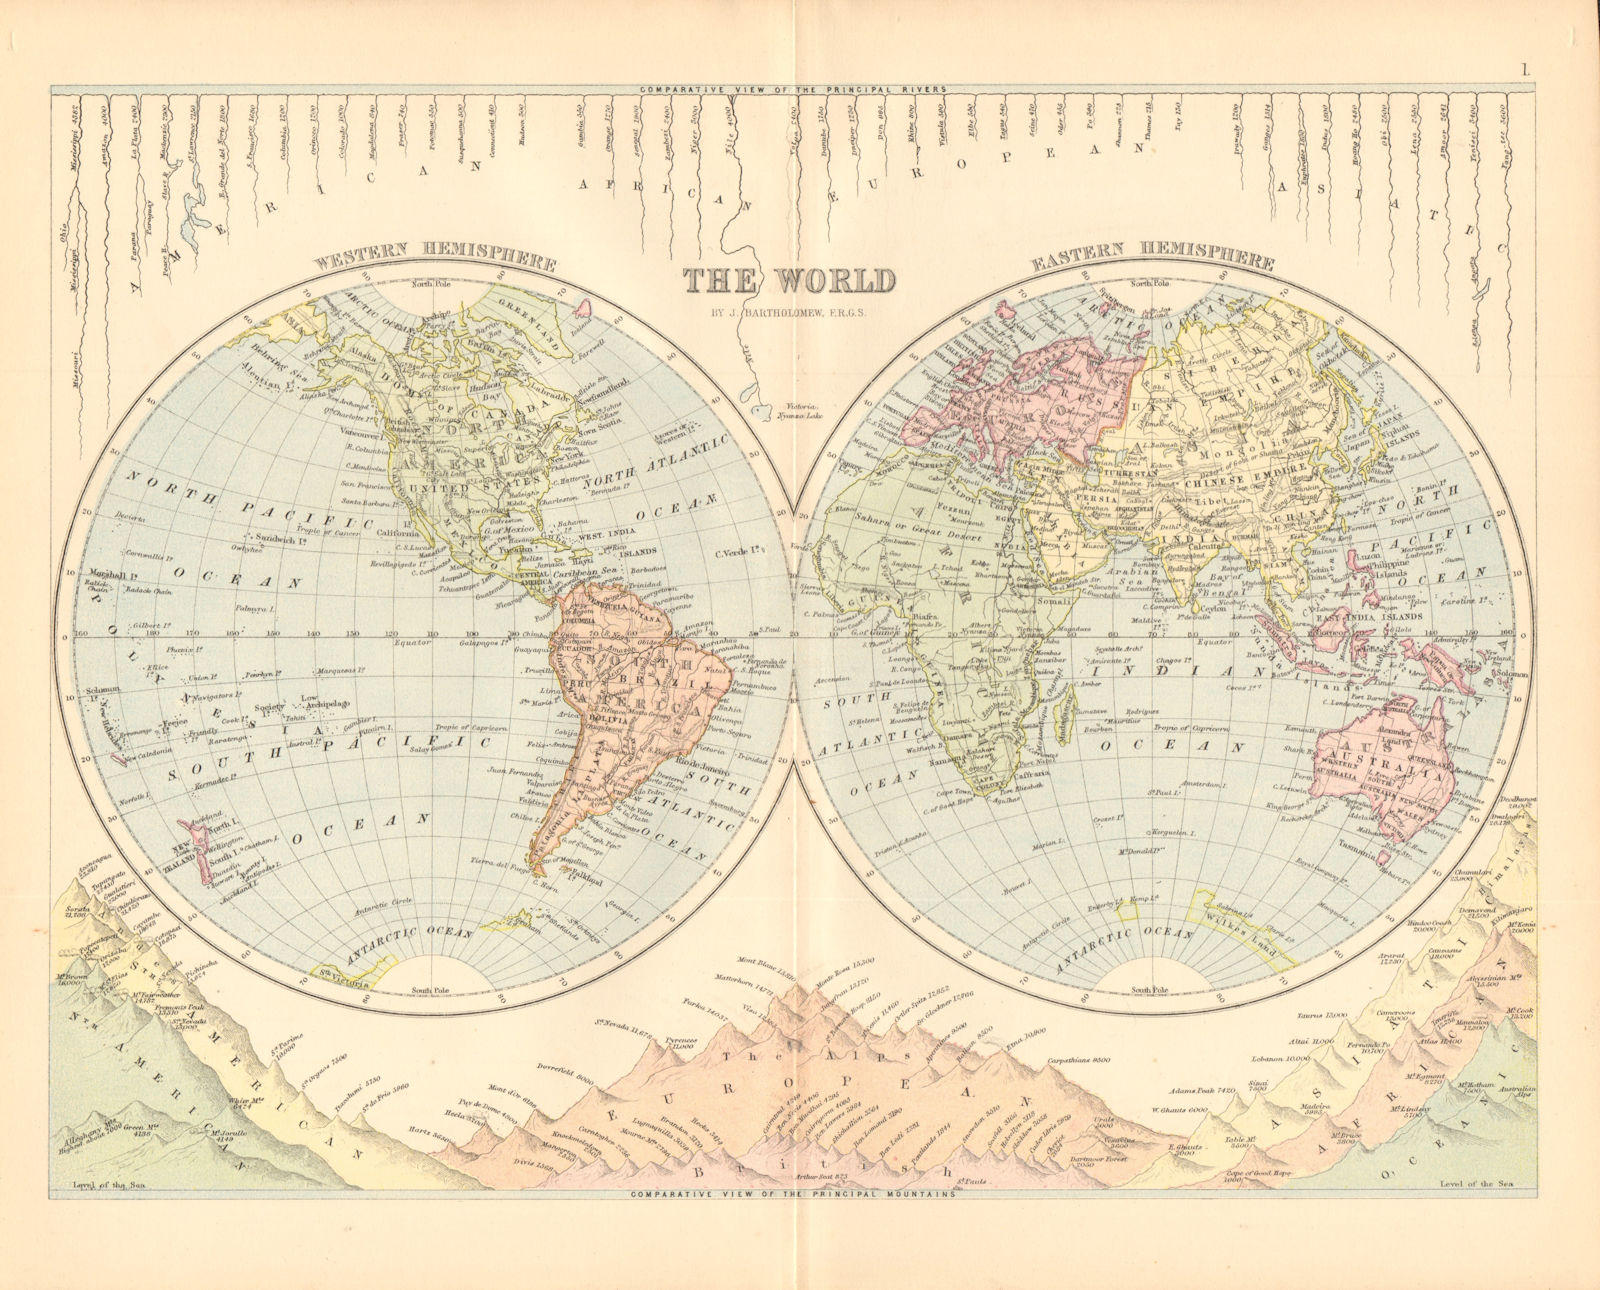 THE WORLD IN HEMISPHERES. River lengths Mountain heights. BARTHOLOMEW 1876 map